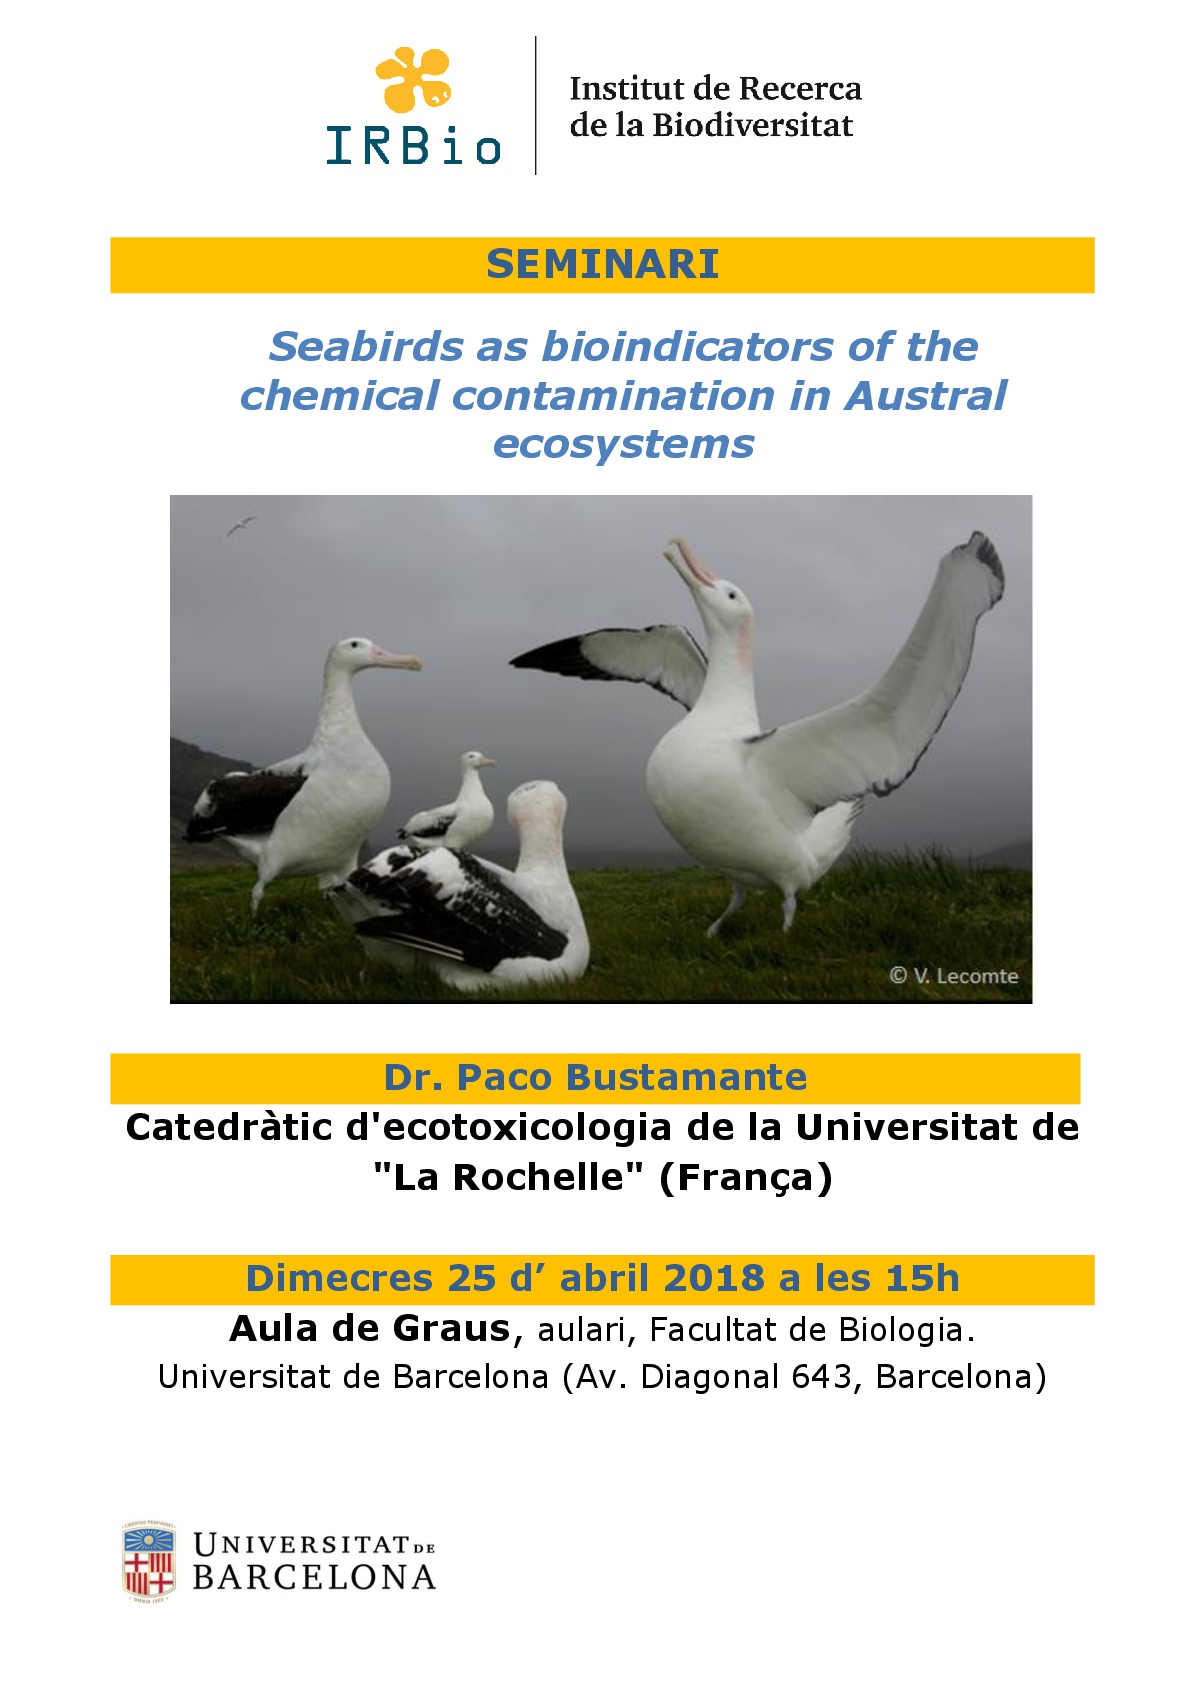 Seabirds as bioindicators of the chemical contamination in Austral ecosystems